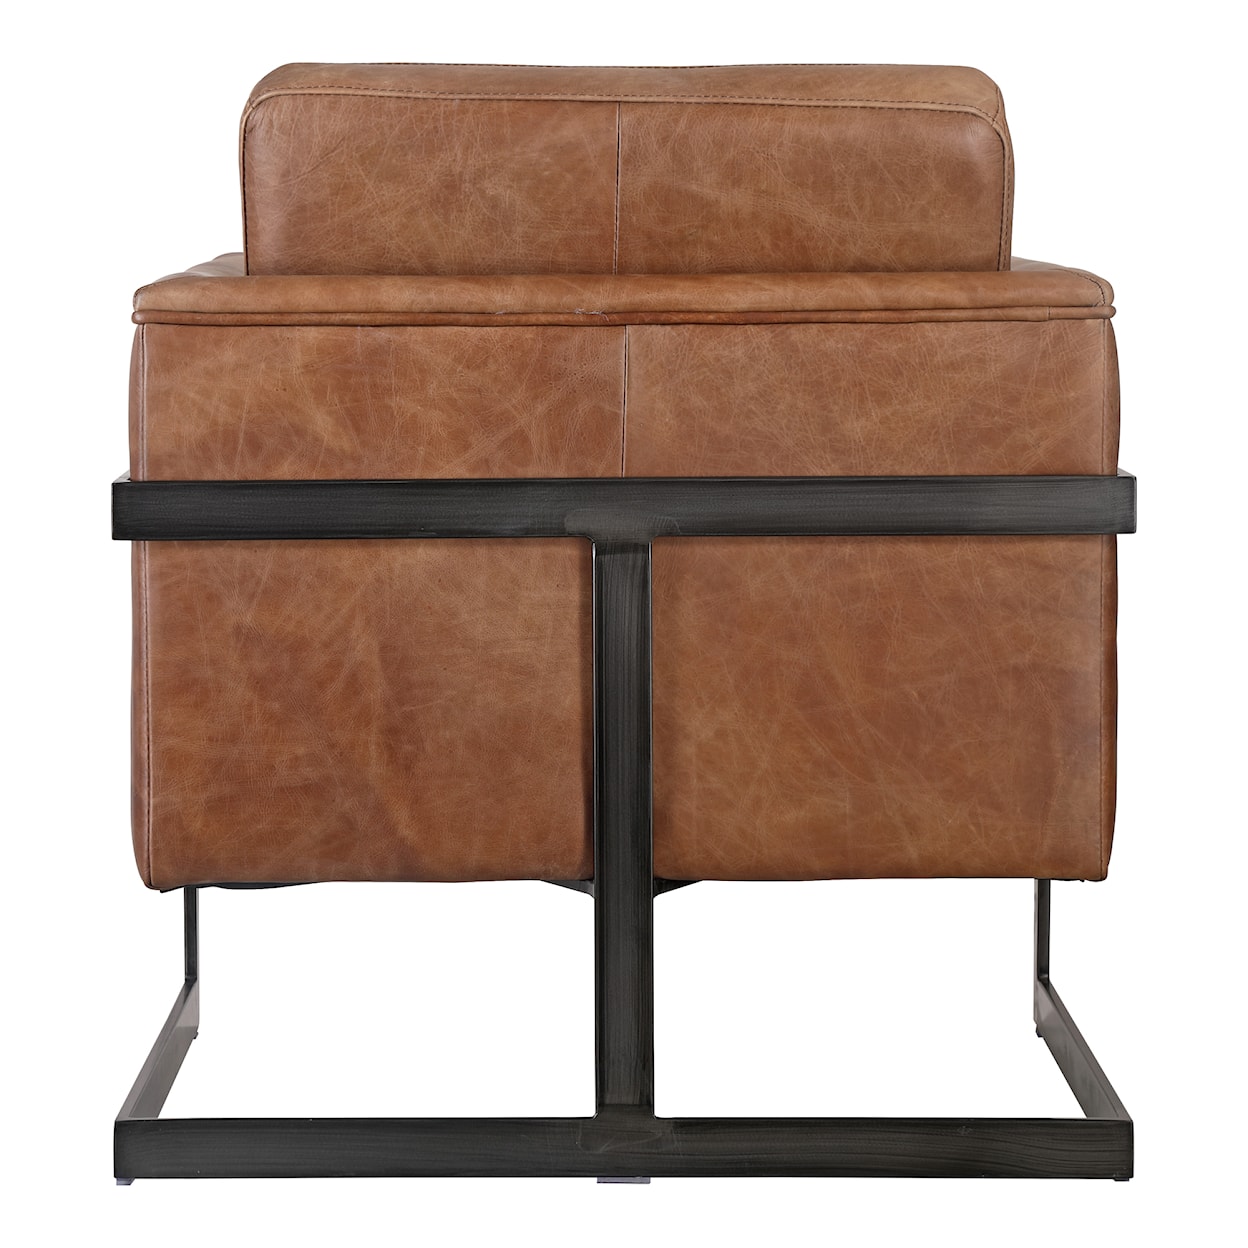 Moe's Home Collection Luxley Luxley Club Chair Open Road Brown Leather